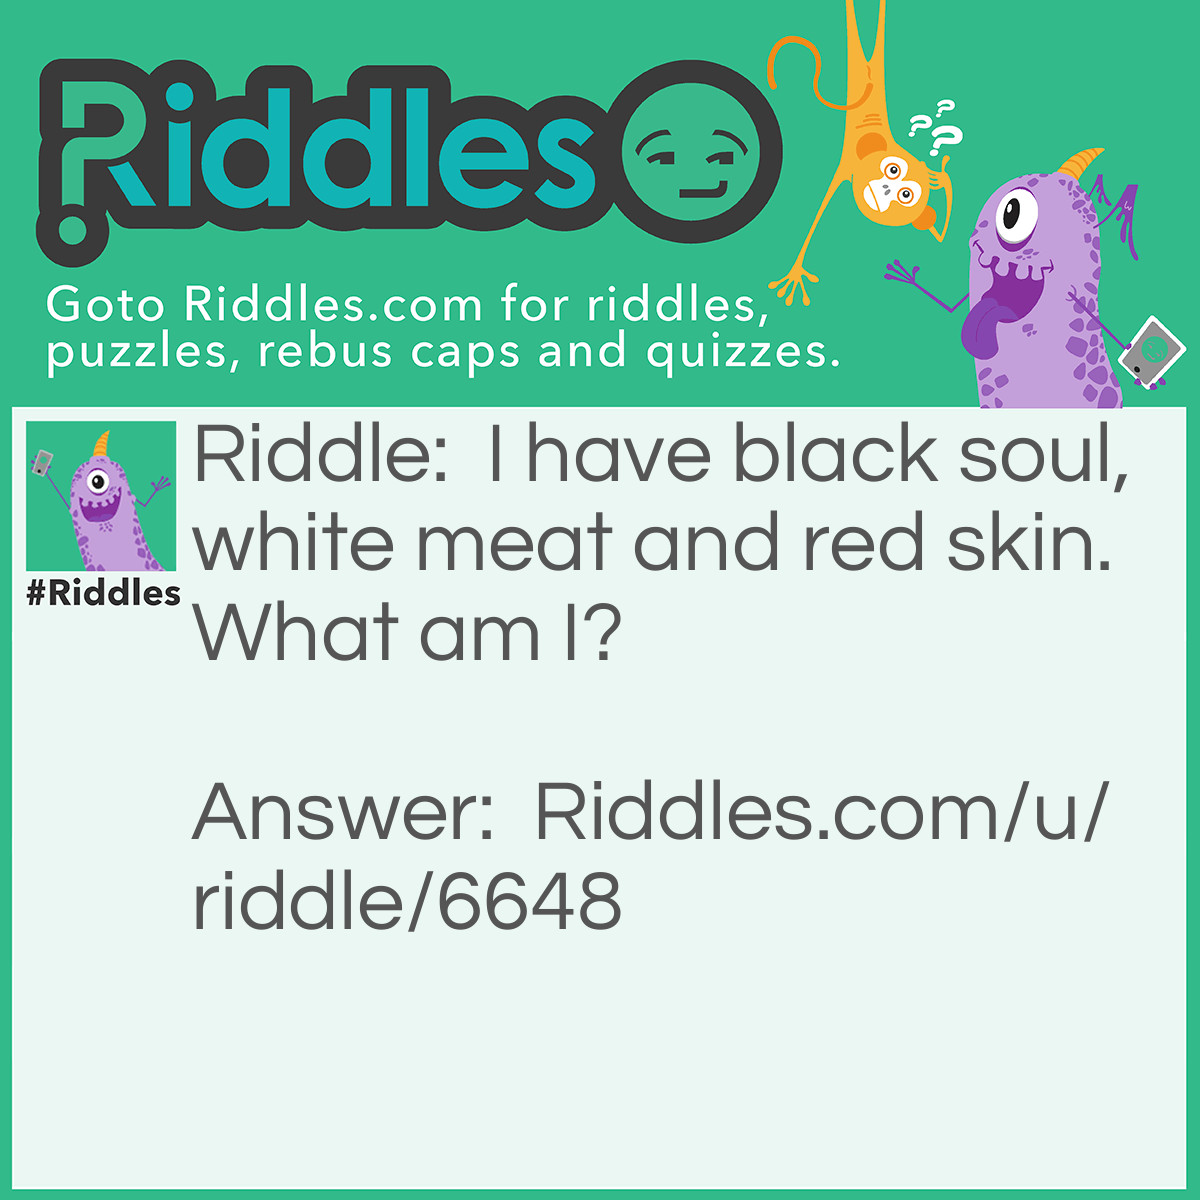 Riddle: I have black soul, white meat and red skin. What am I? Answer: An apple.